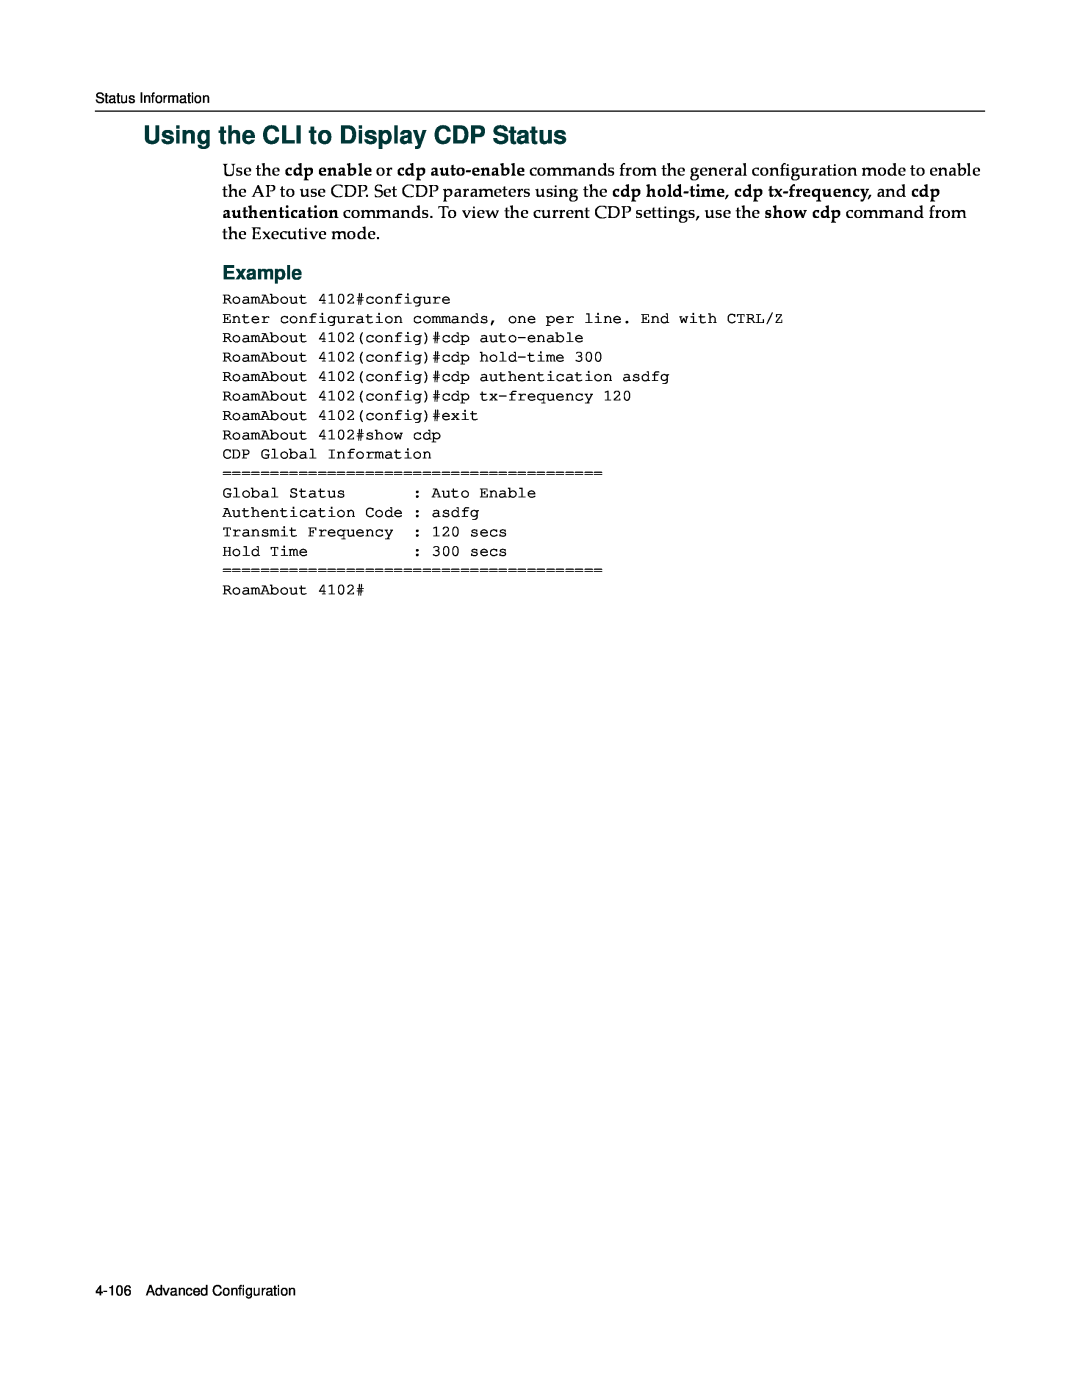 Enterasys Networks RBT-4102 manual Using the CLI to Display CDP Status, Example 